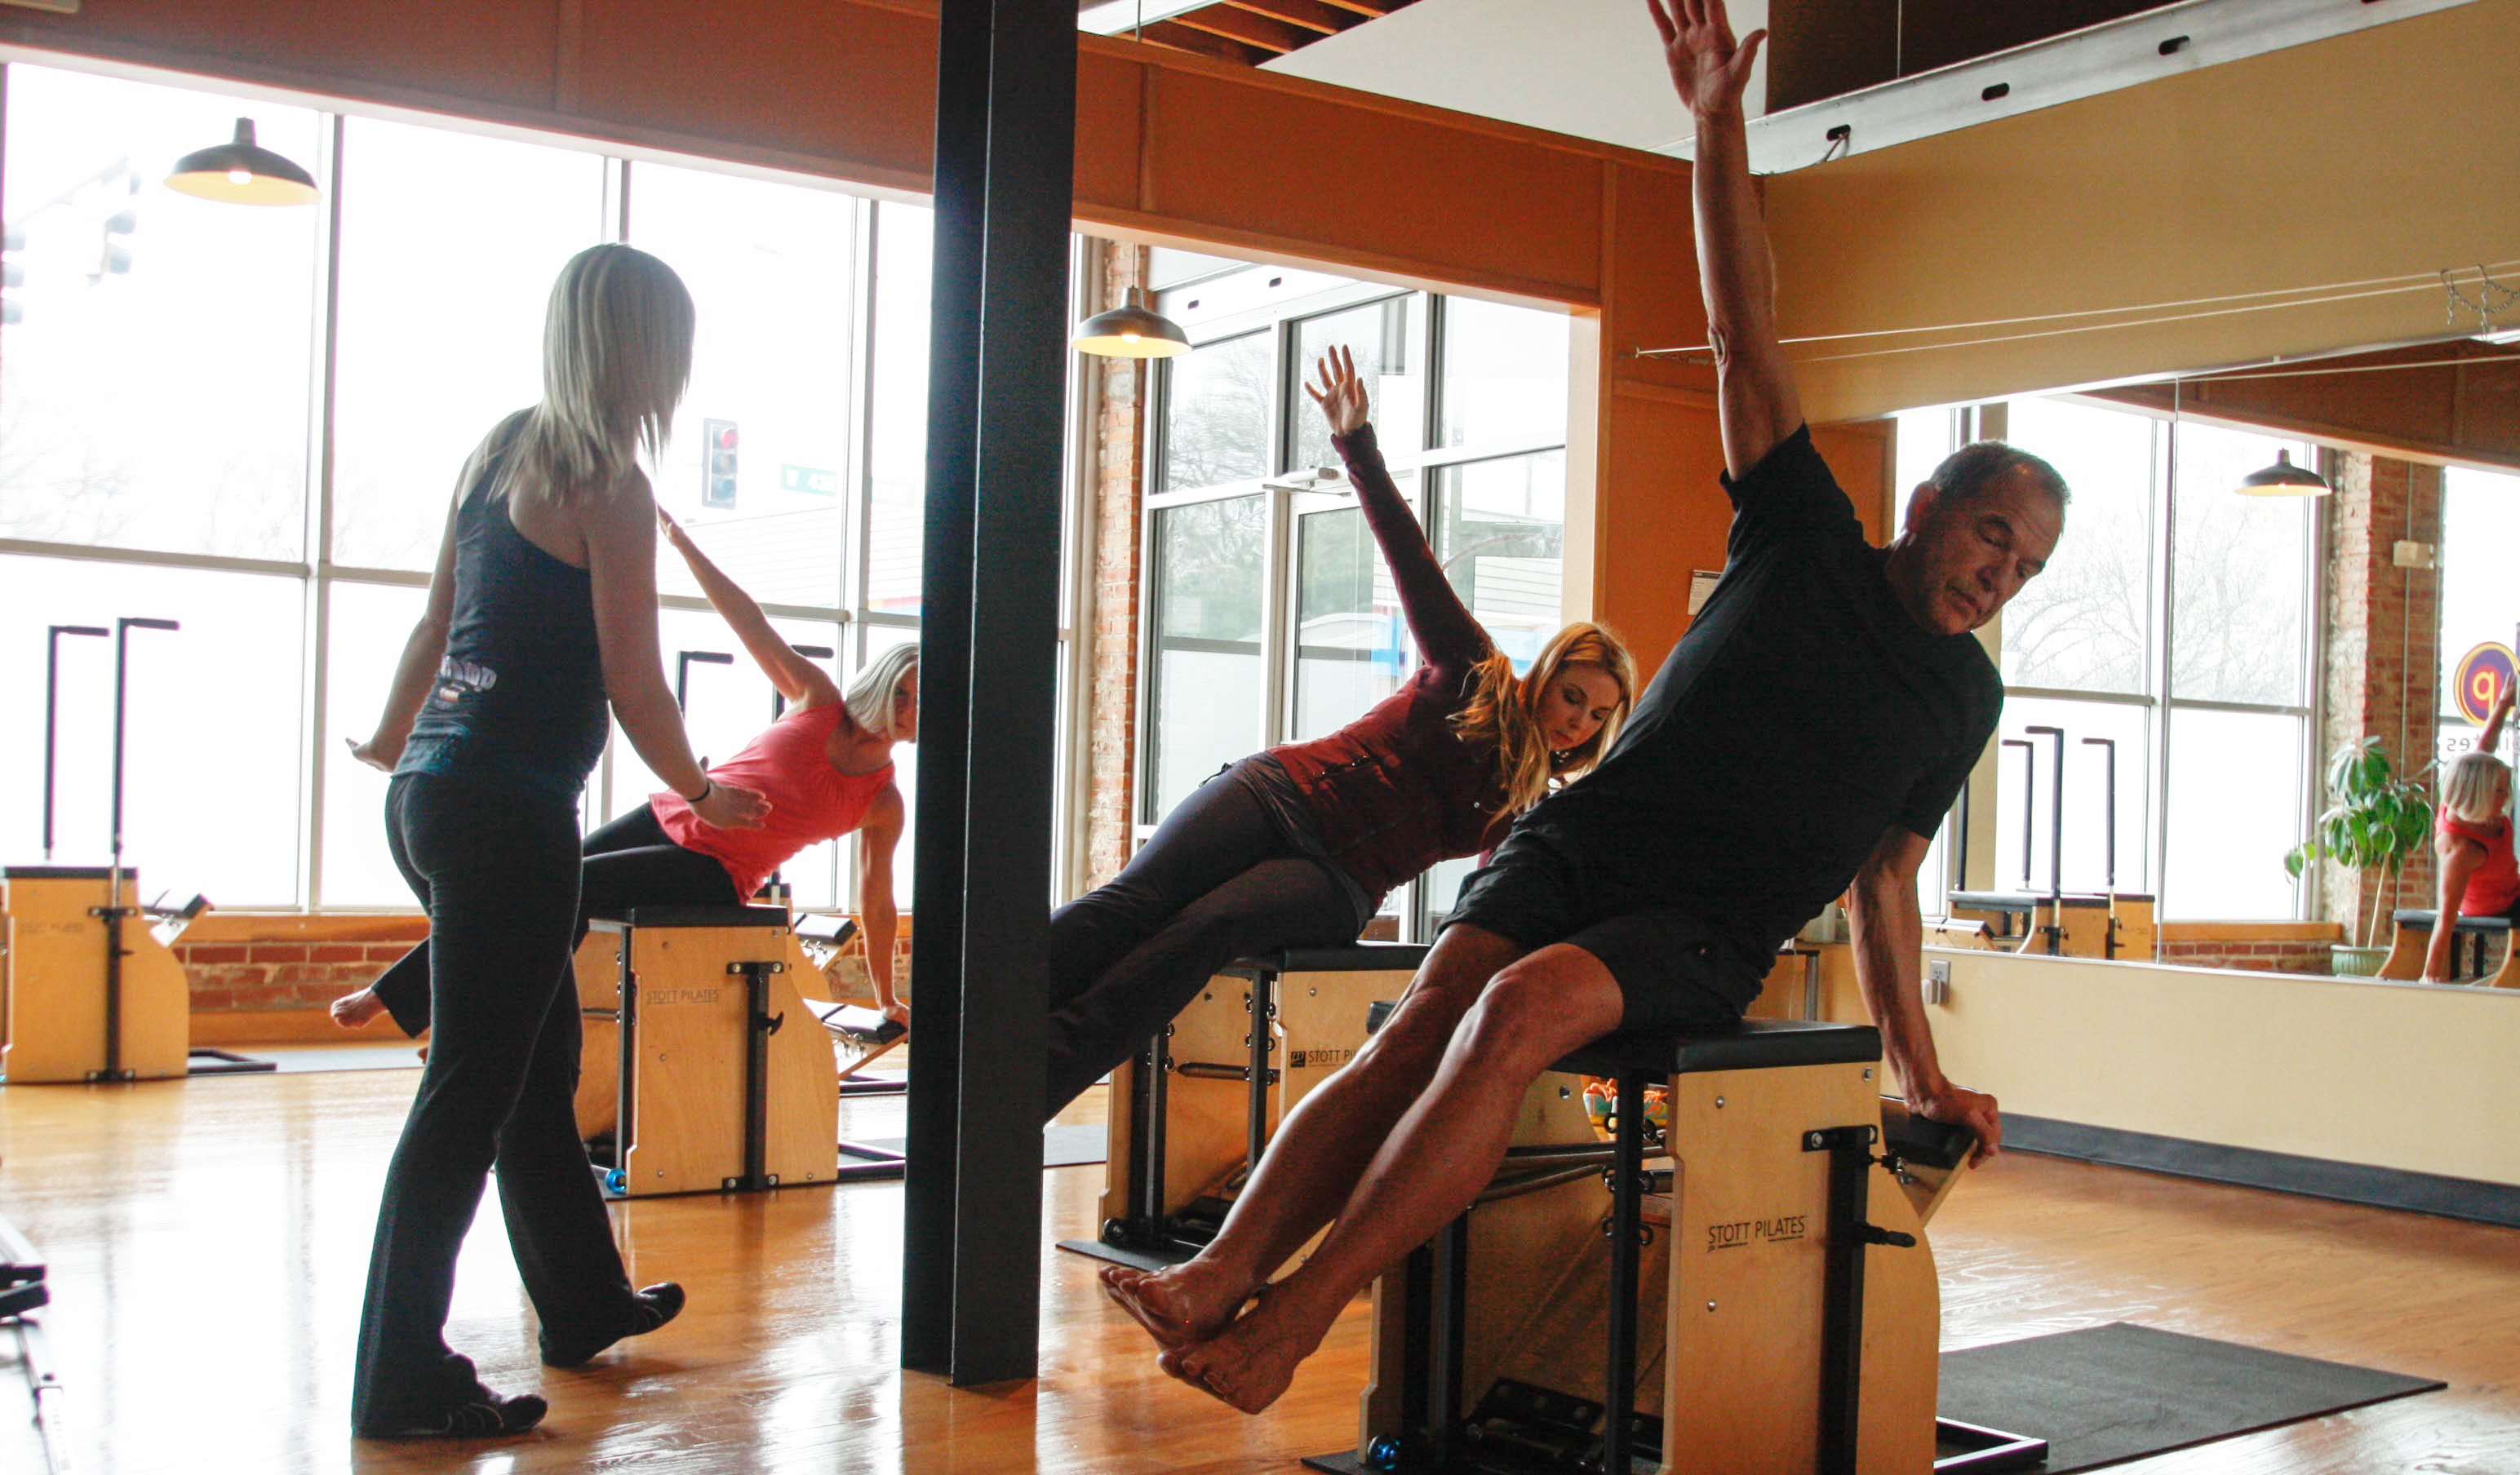 http://pilates1901.com/wp-content/uploads/2014/10/questions-to-ask-your-mission-hills-pilates-trainer.jpg